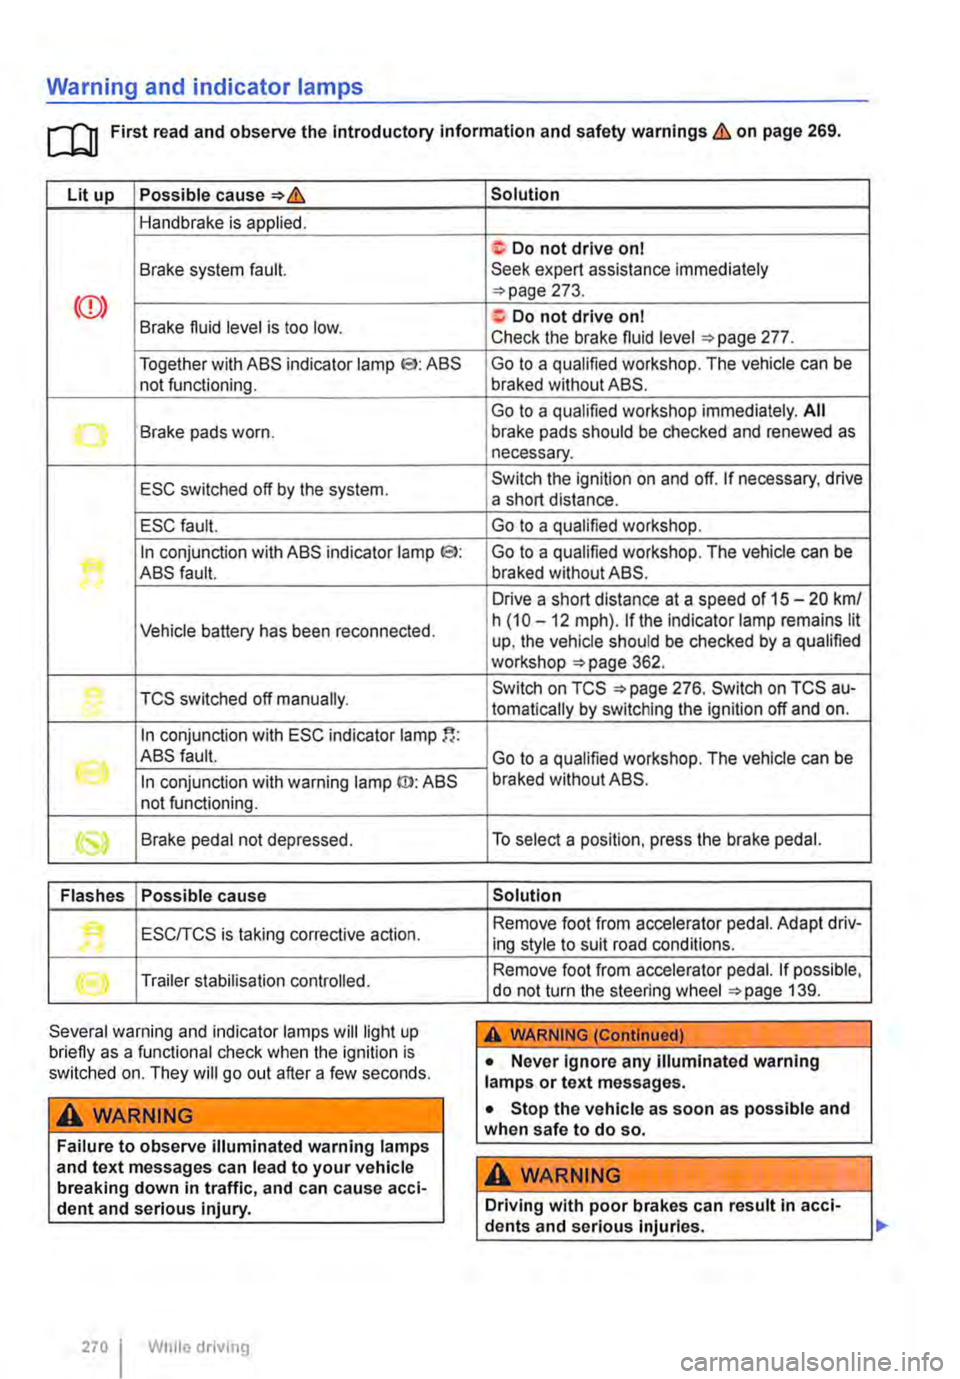 VOLKSWAGEN TRANSPORTER 2014  Owners Manual Warning and indicator lamps 
[Q First read and observe the Introductory information and safety warnings & on page 269. 
Lit up Possible cause=>& 
Handbrake is applied. 
Brake system fault. 
<CD> Brake